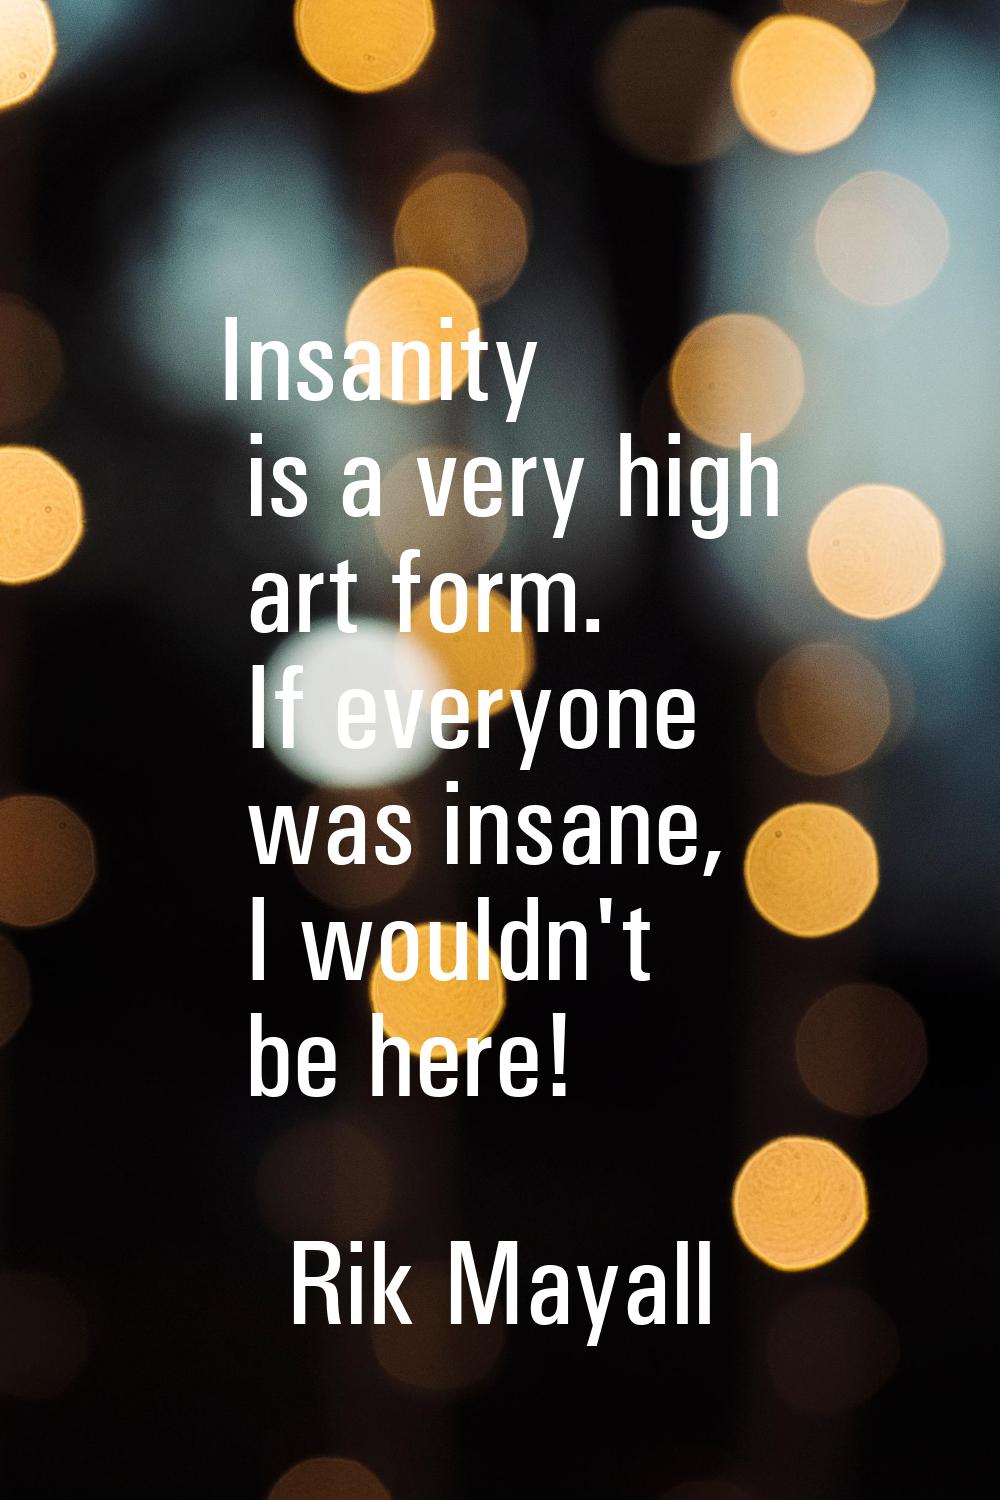 Insanity is a very high art form. If everyone was insane, I wouldn't be here!